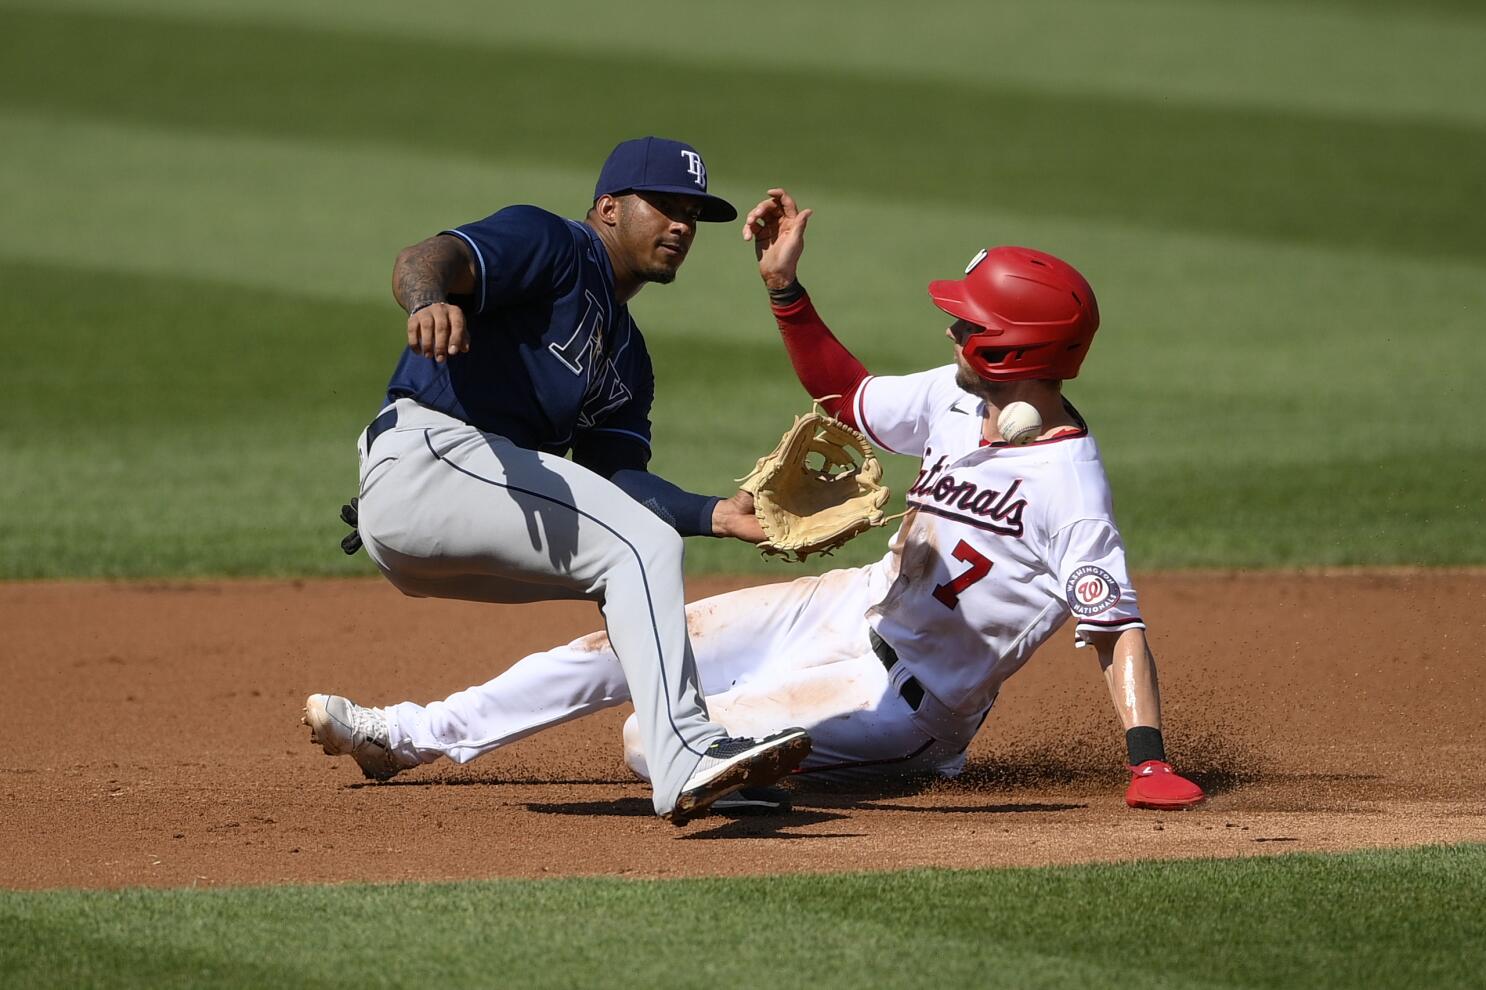 Is Trea Turner really this great? - Beyond the Box Score